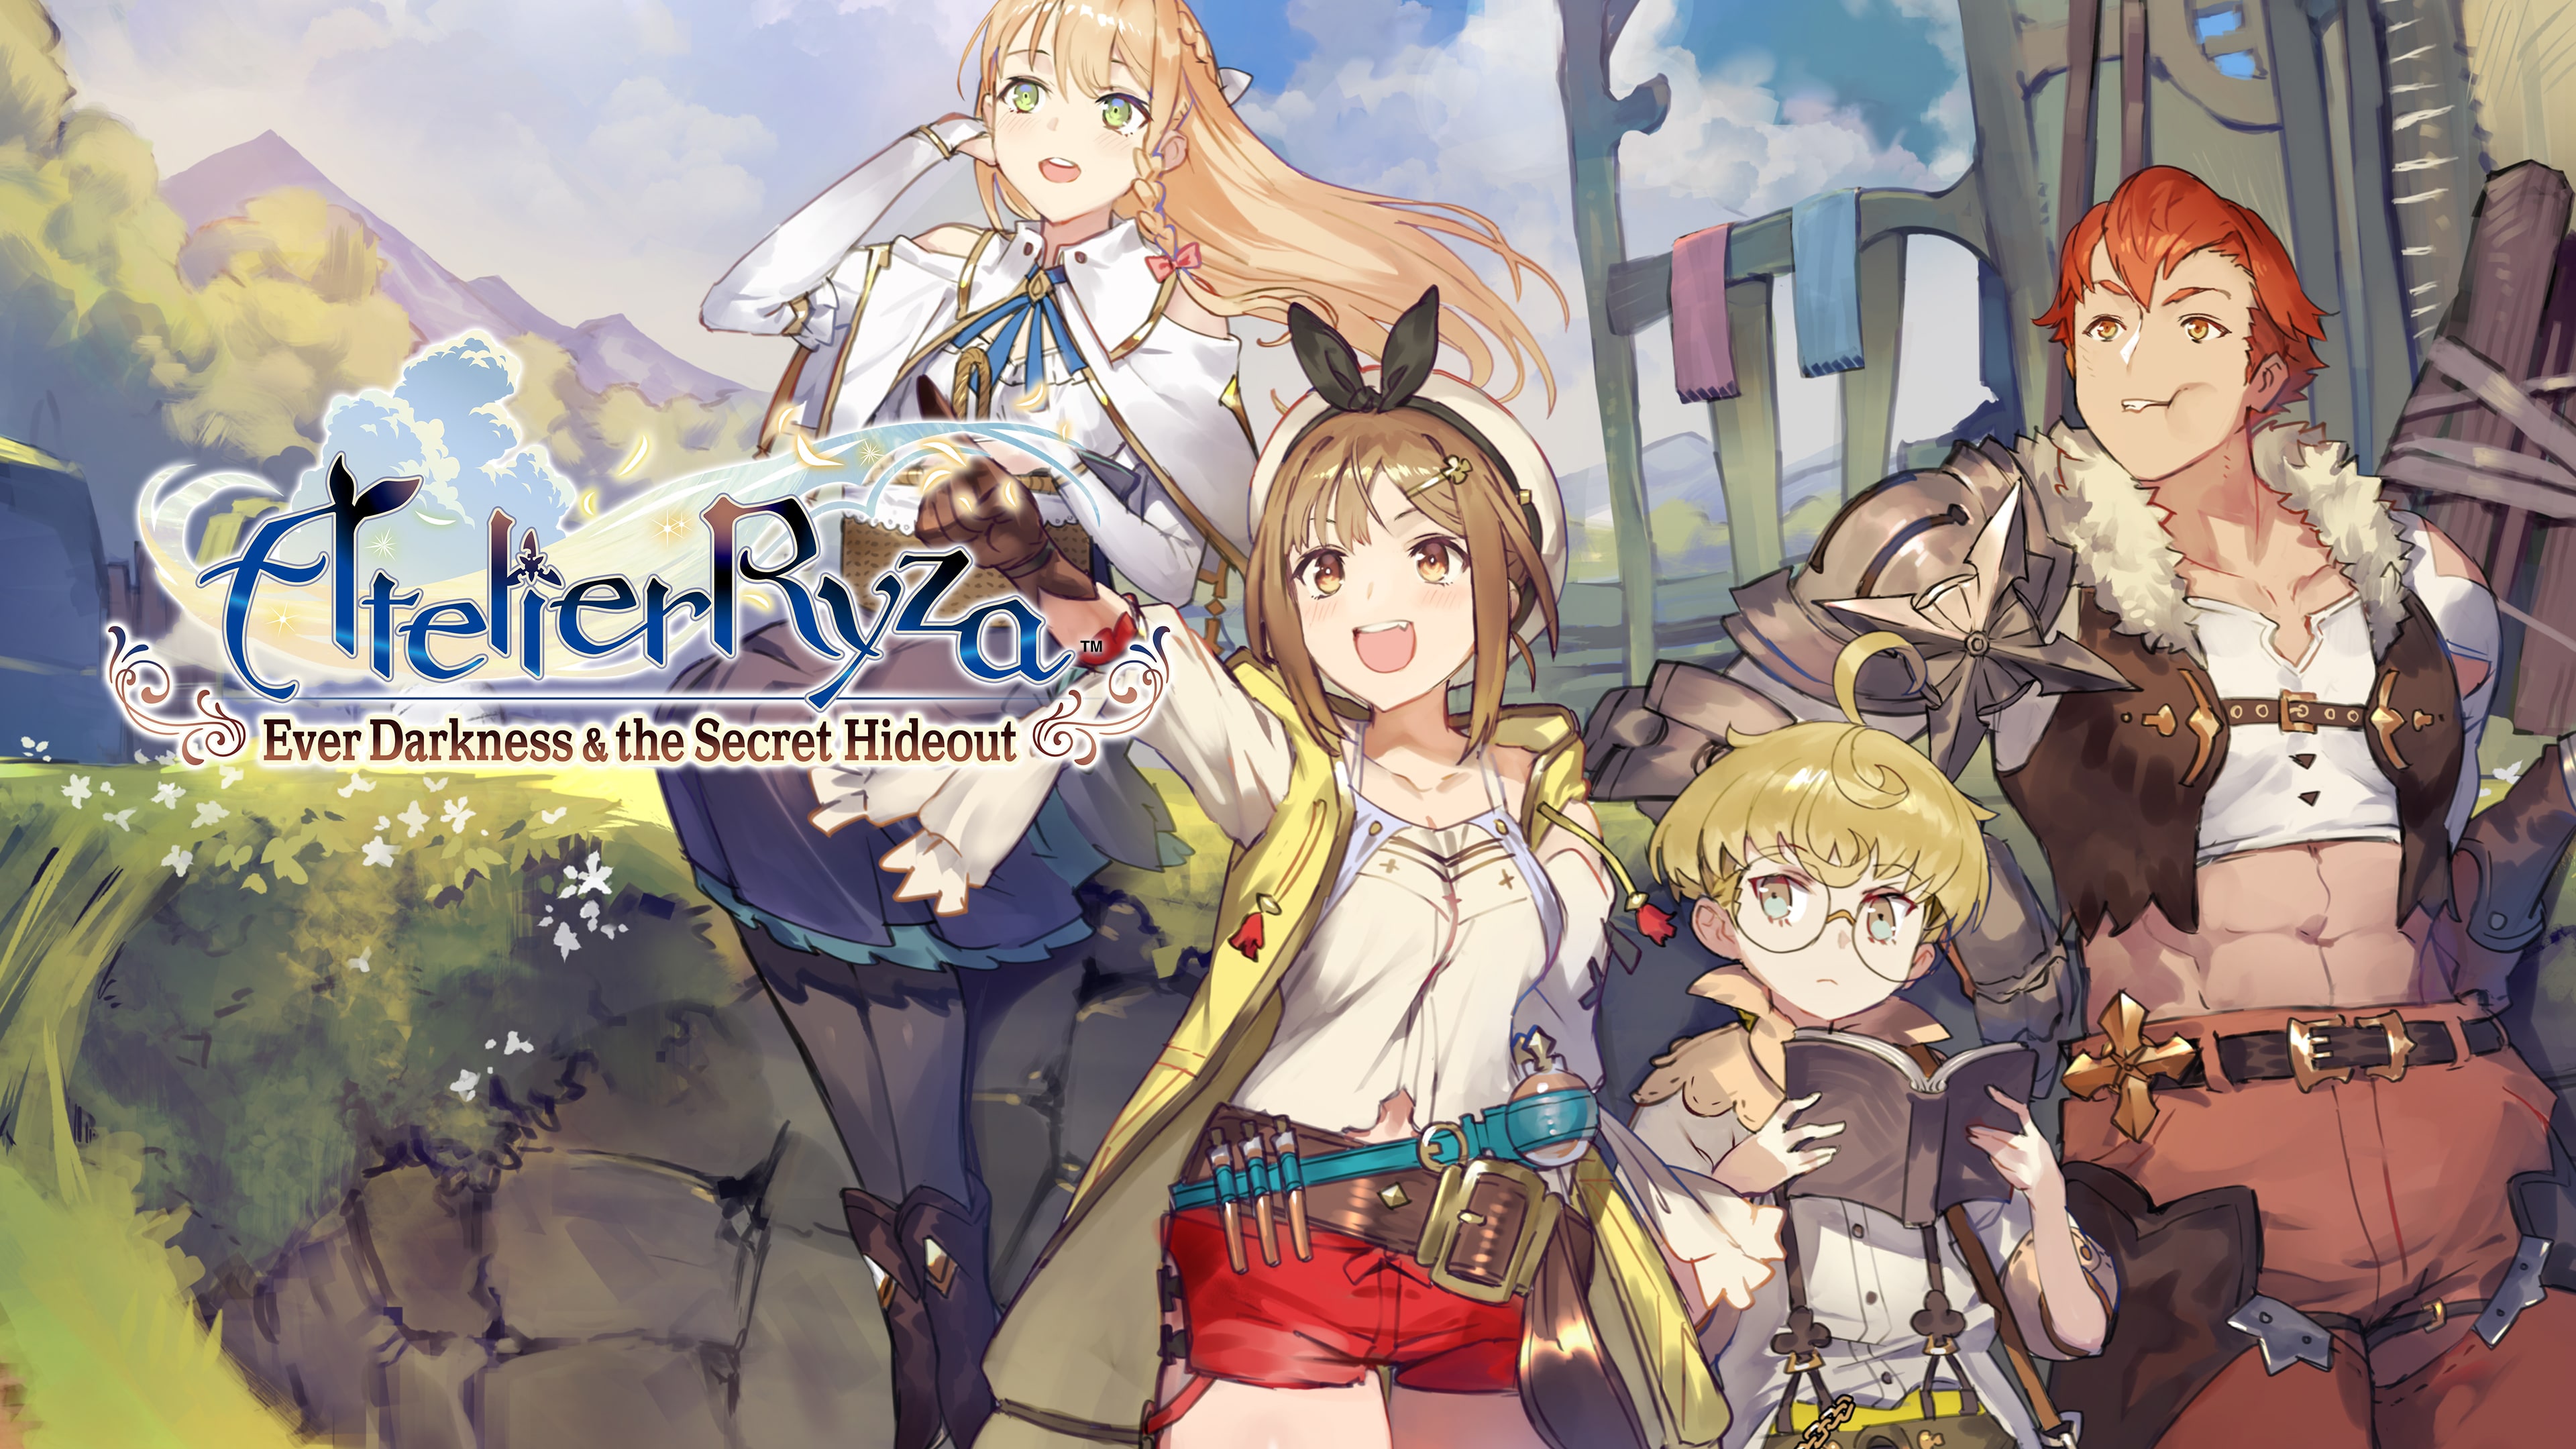 Atelier Ryza: Ever Darkness ＆ the Secret Hideout (English Ver.)